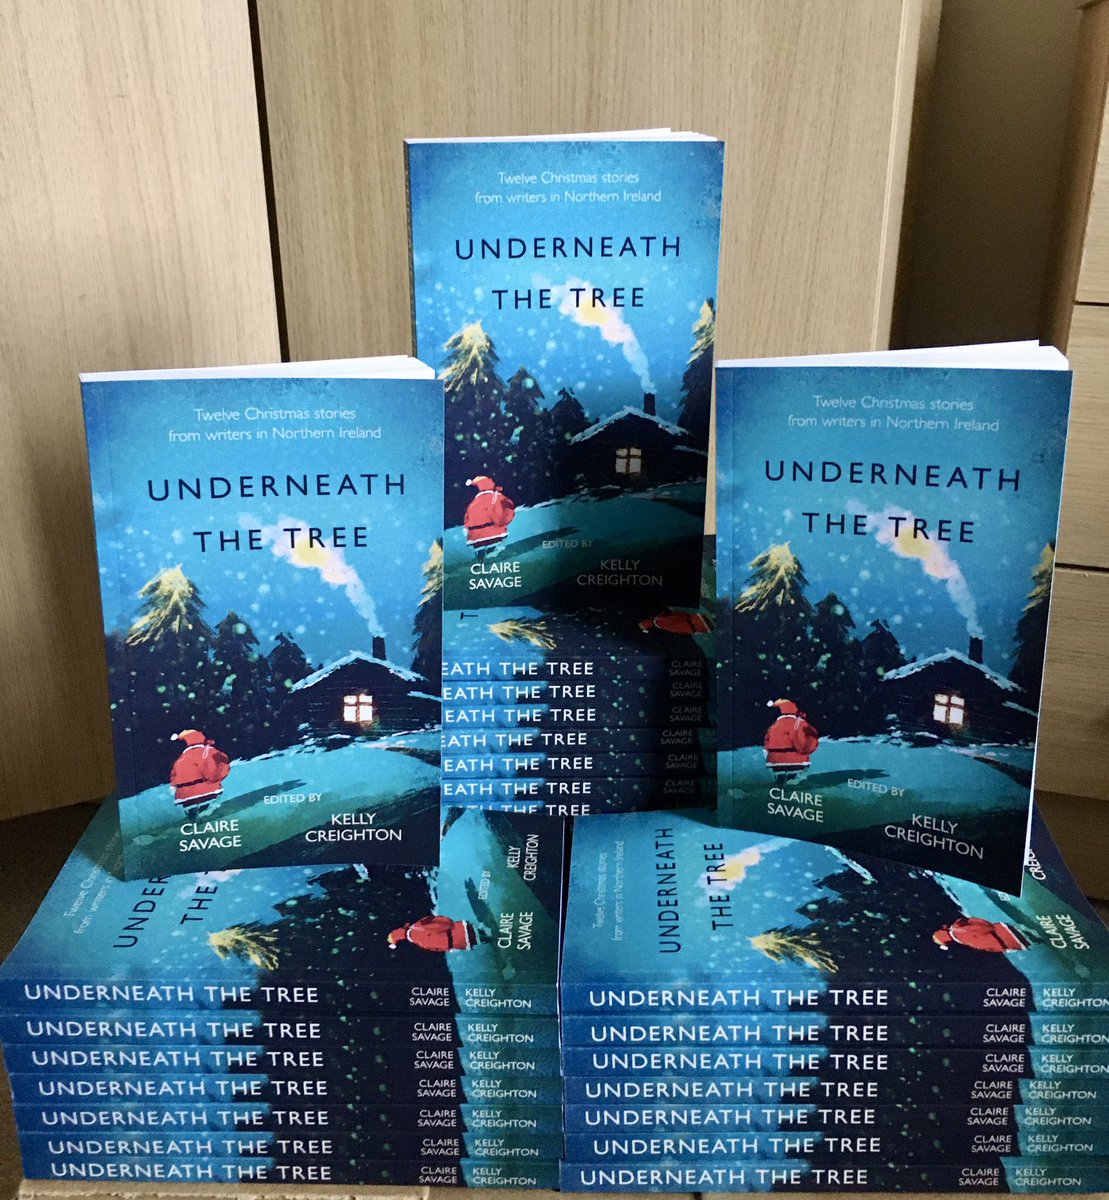 Look what arrived!These are for my family but you can preorder the ebook on Amazon now. Paperbacks will be avail Nov 4. As well as supporting NI writers by reading their work, purchasing also supports @SimonCommNI & @WorldofOwls who will receive all proceeds. 
#underneaththetree